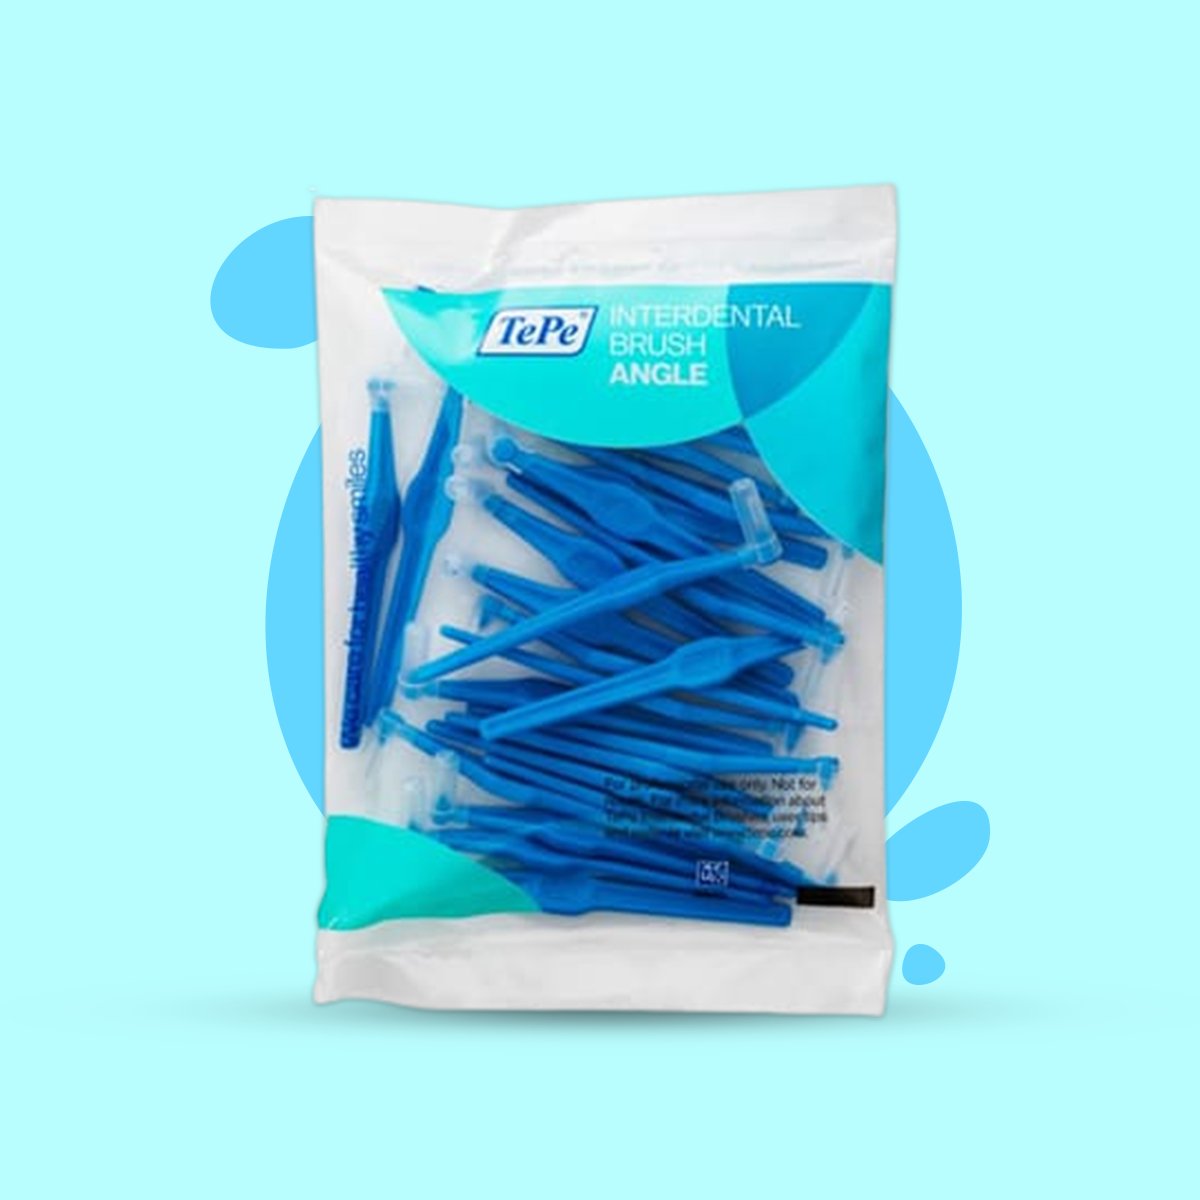 The user-friendly handle has a stable grip that enables cleaning with controlled movements.
Shop here: bit.ly/3y37qJZ
#Dealoftheday #Tepe #Angle #Interdental #Brushes #Blue #oralcare #oralcareroutine #teehtcare #healthcareroutine #perfectoralcare #smoothbrush